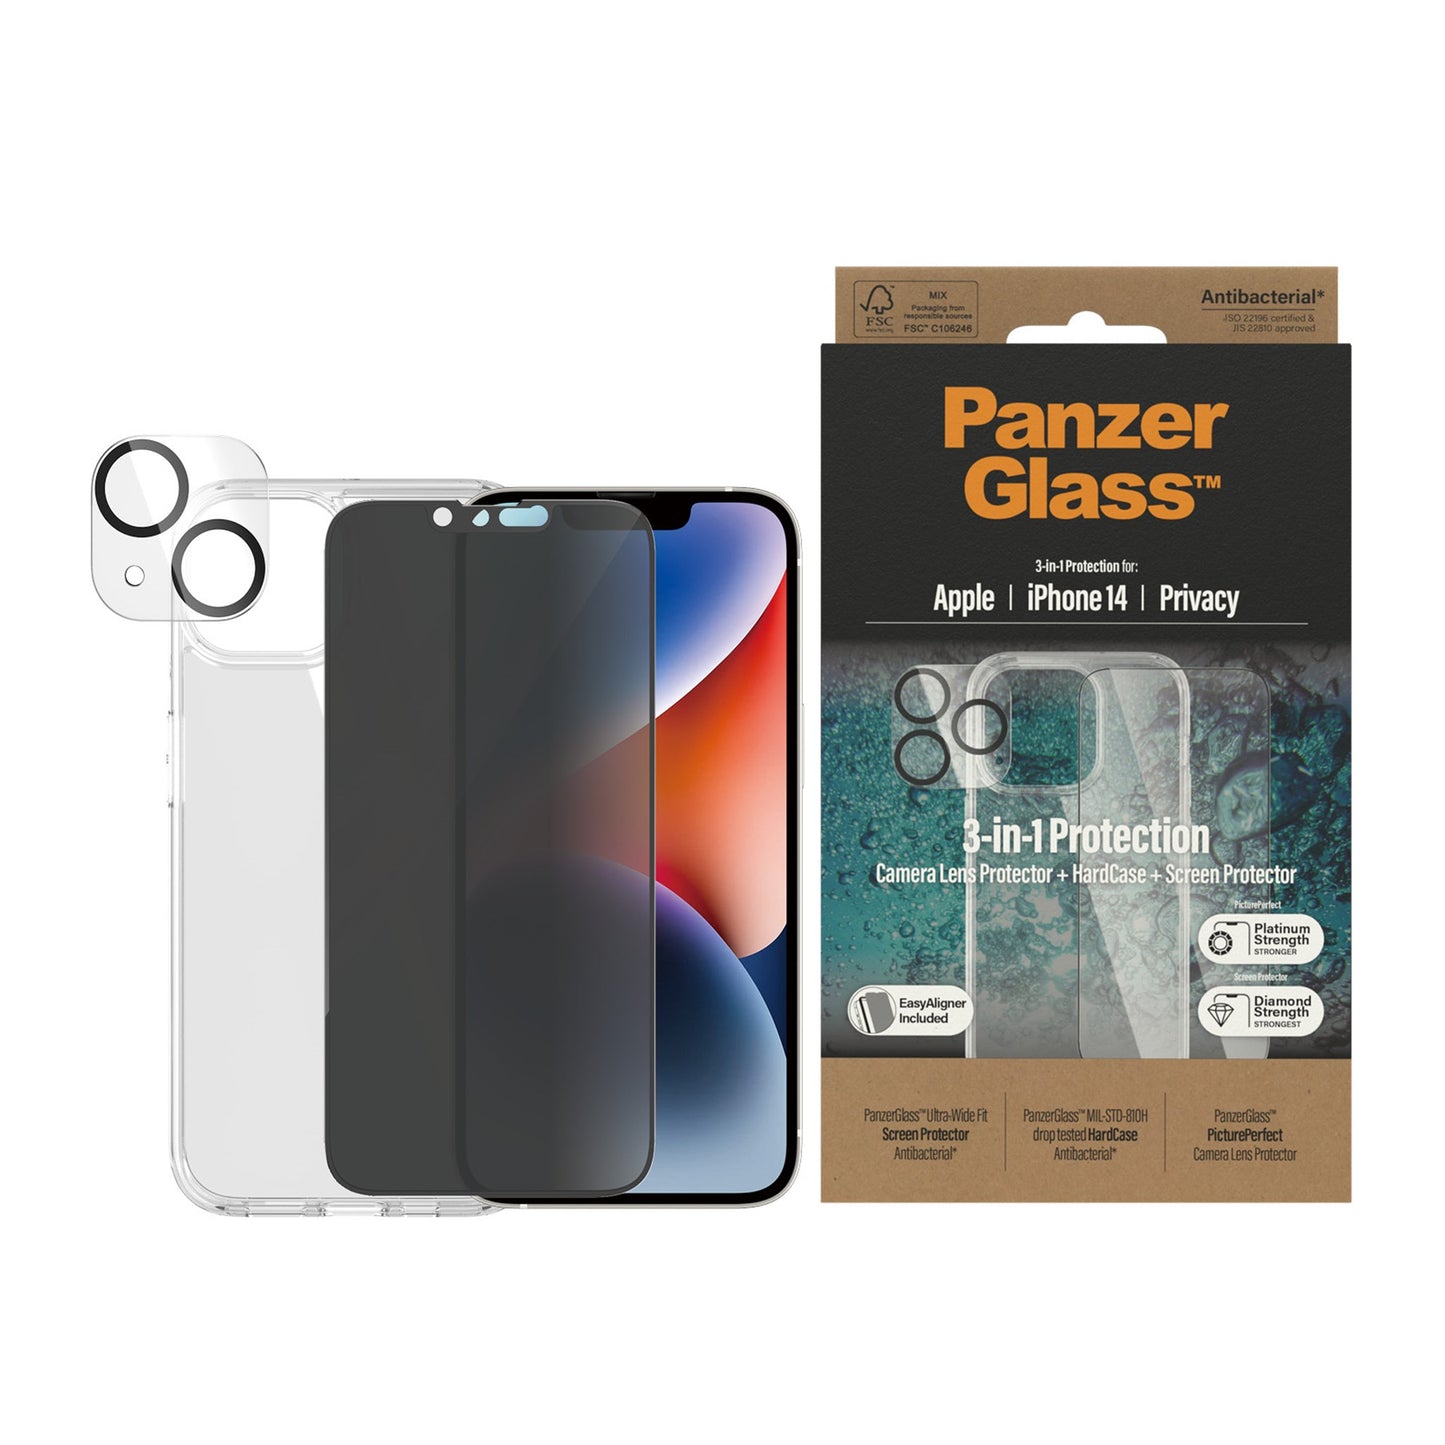 PanzerGlass™ 3-in-1 Privacy Protection Pack iPhone 14 2